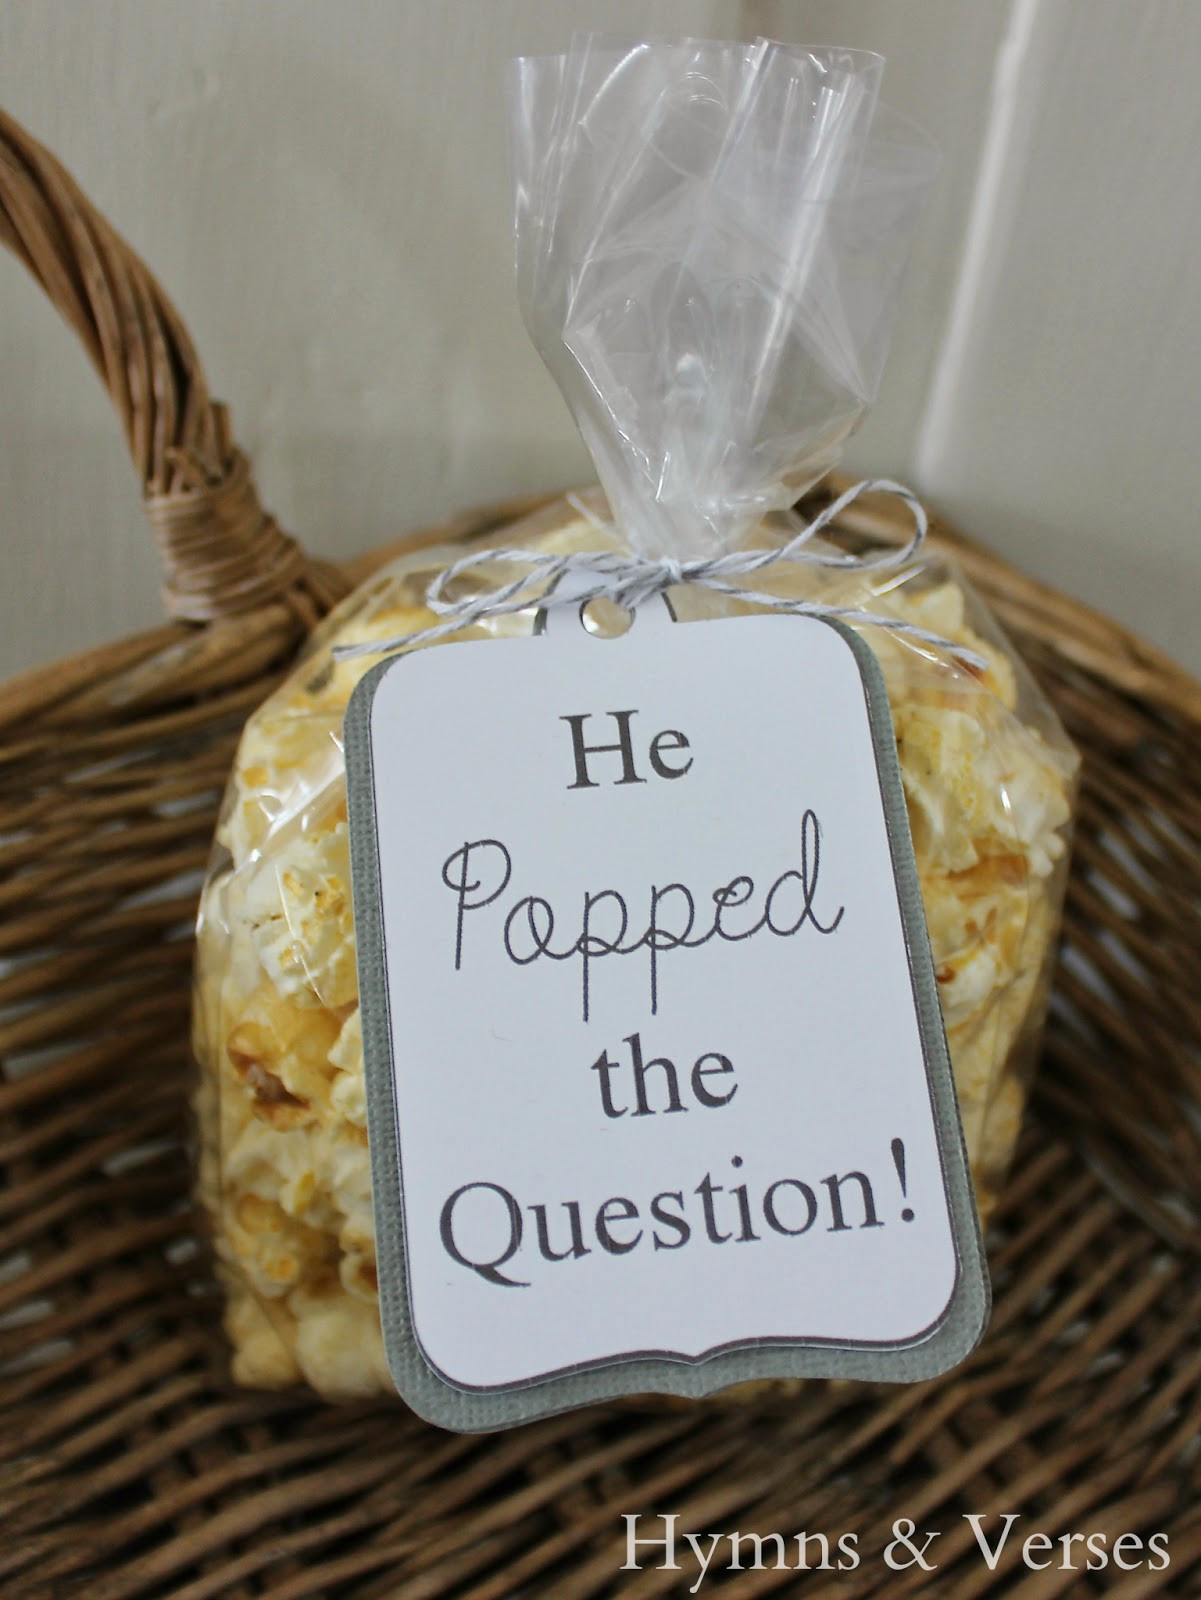 Ideas For Engagement Party Favors
 Hymns and Verses Engagement Party and He Popped the